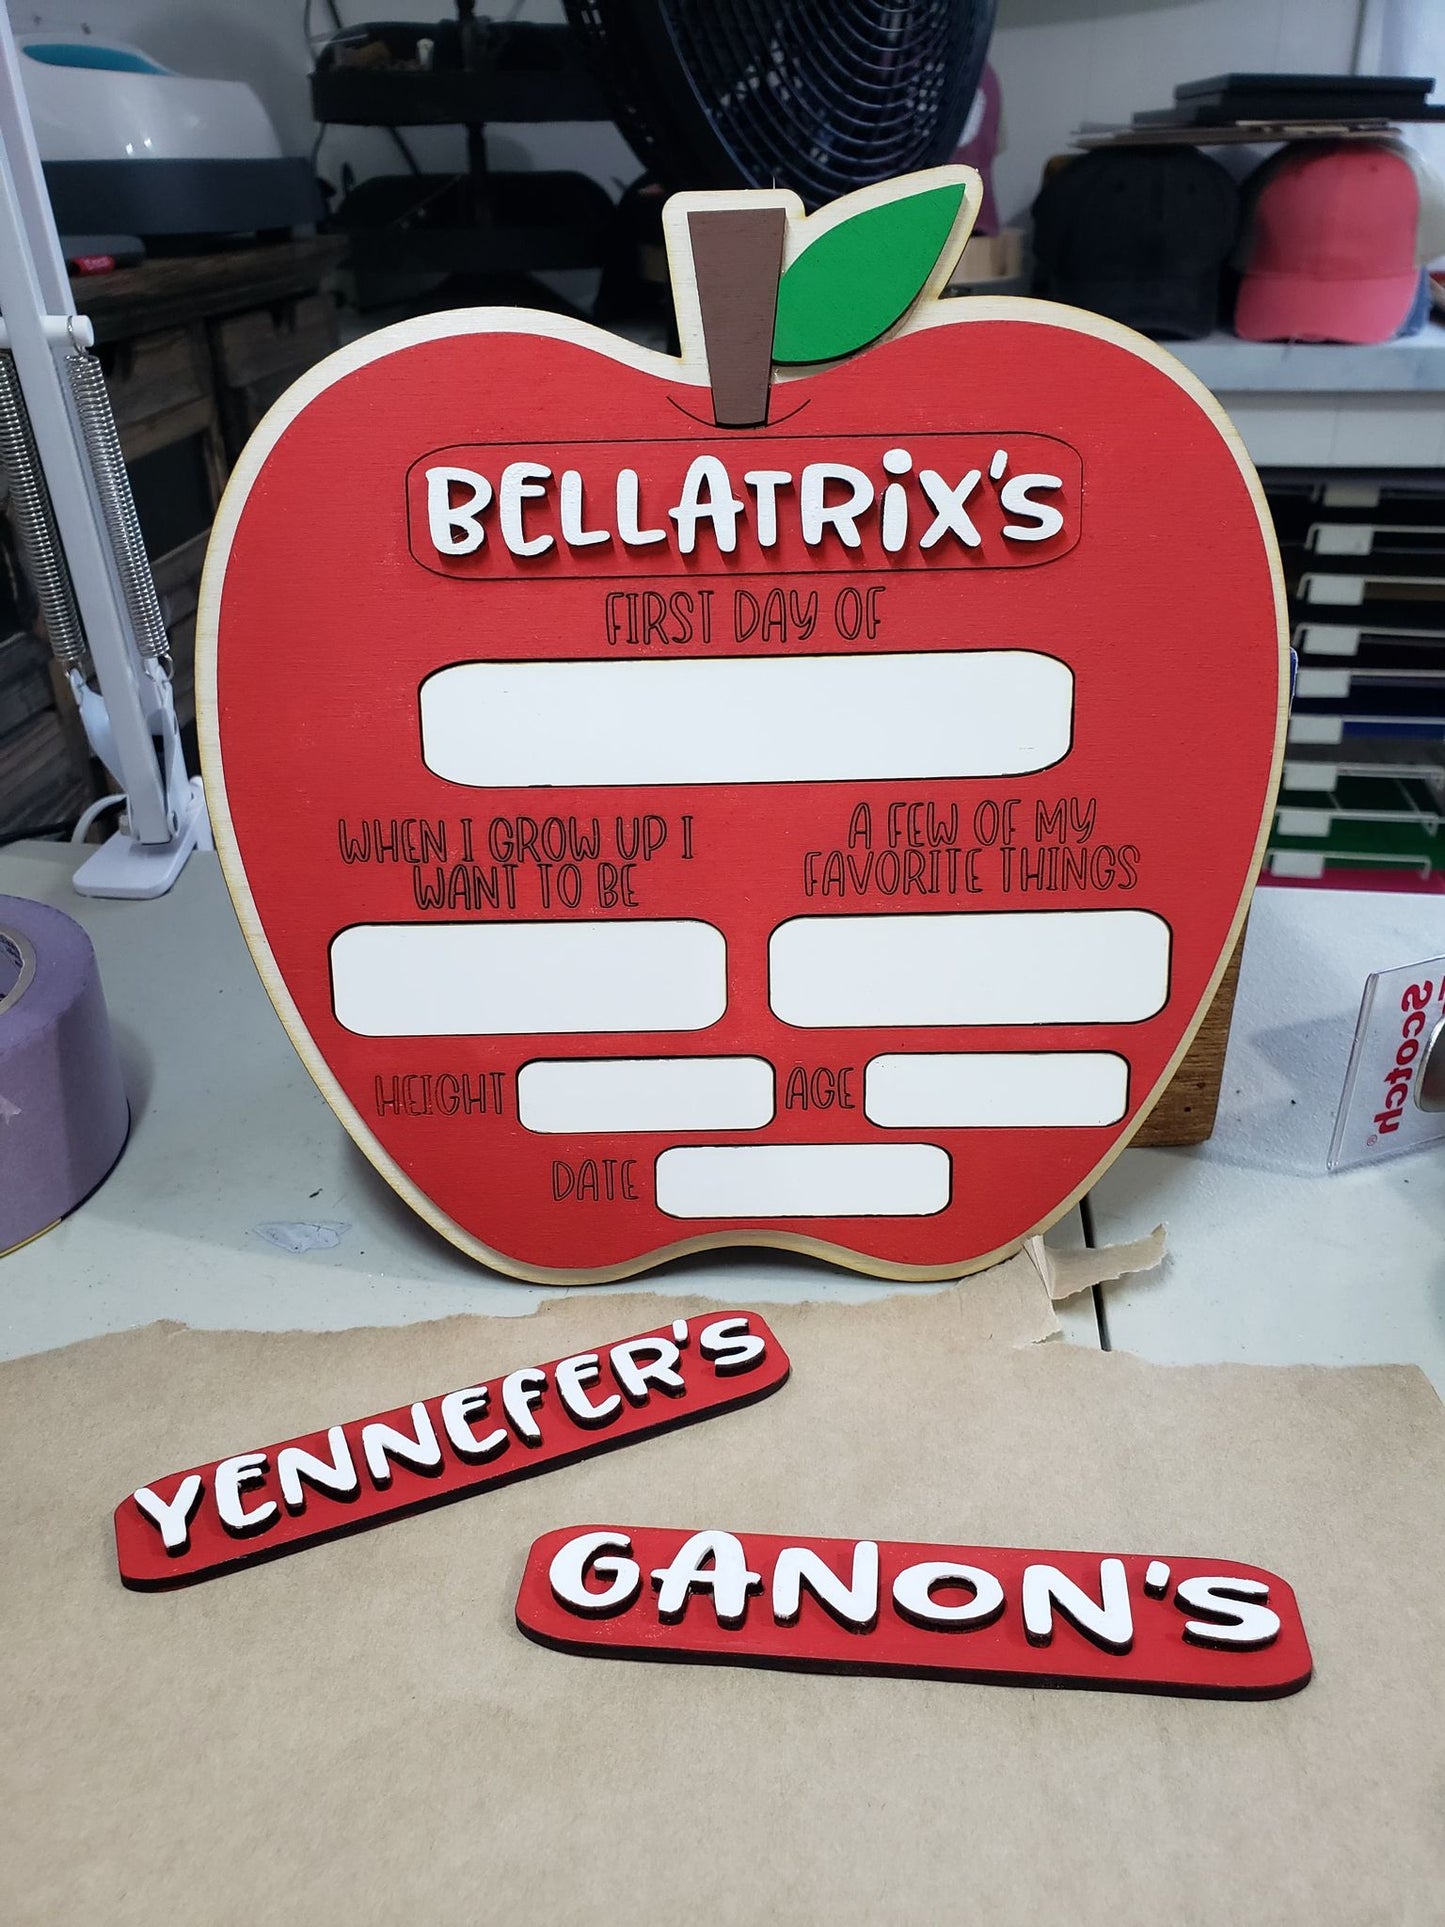 Capture your little one's first day of school memories in style with this custom birch wood Apple Photo Prop! It features one removable nameplate and 9 dry erase slots to re-use year after year. Details such as age, height, date, favorite things, and future aspirations can be written directly onto the sign. You can also request a permanent nameplate in the notes section. 9 3/4" wide by 8 3/8" tall.